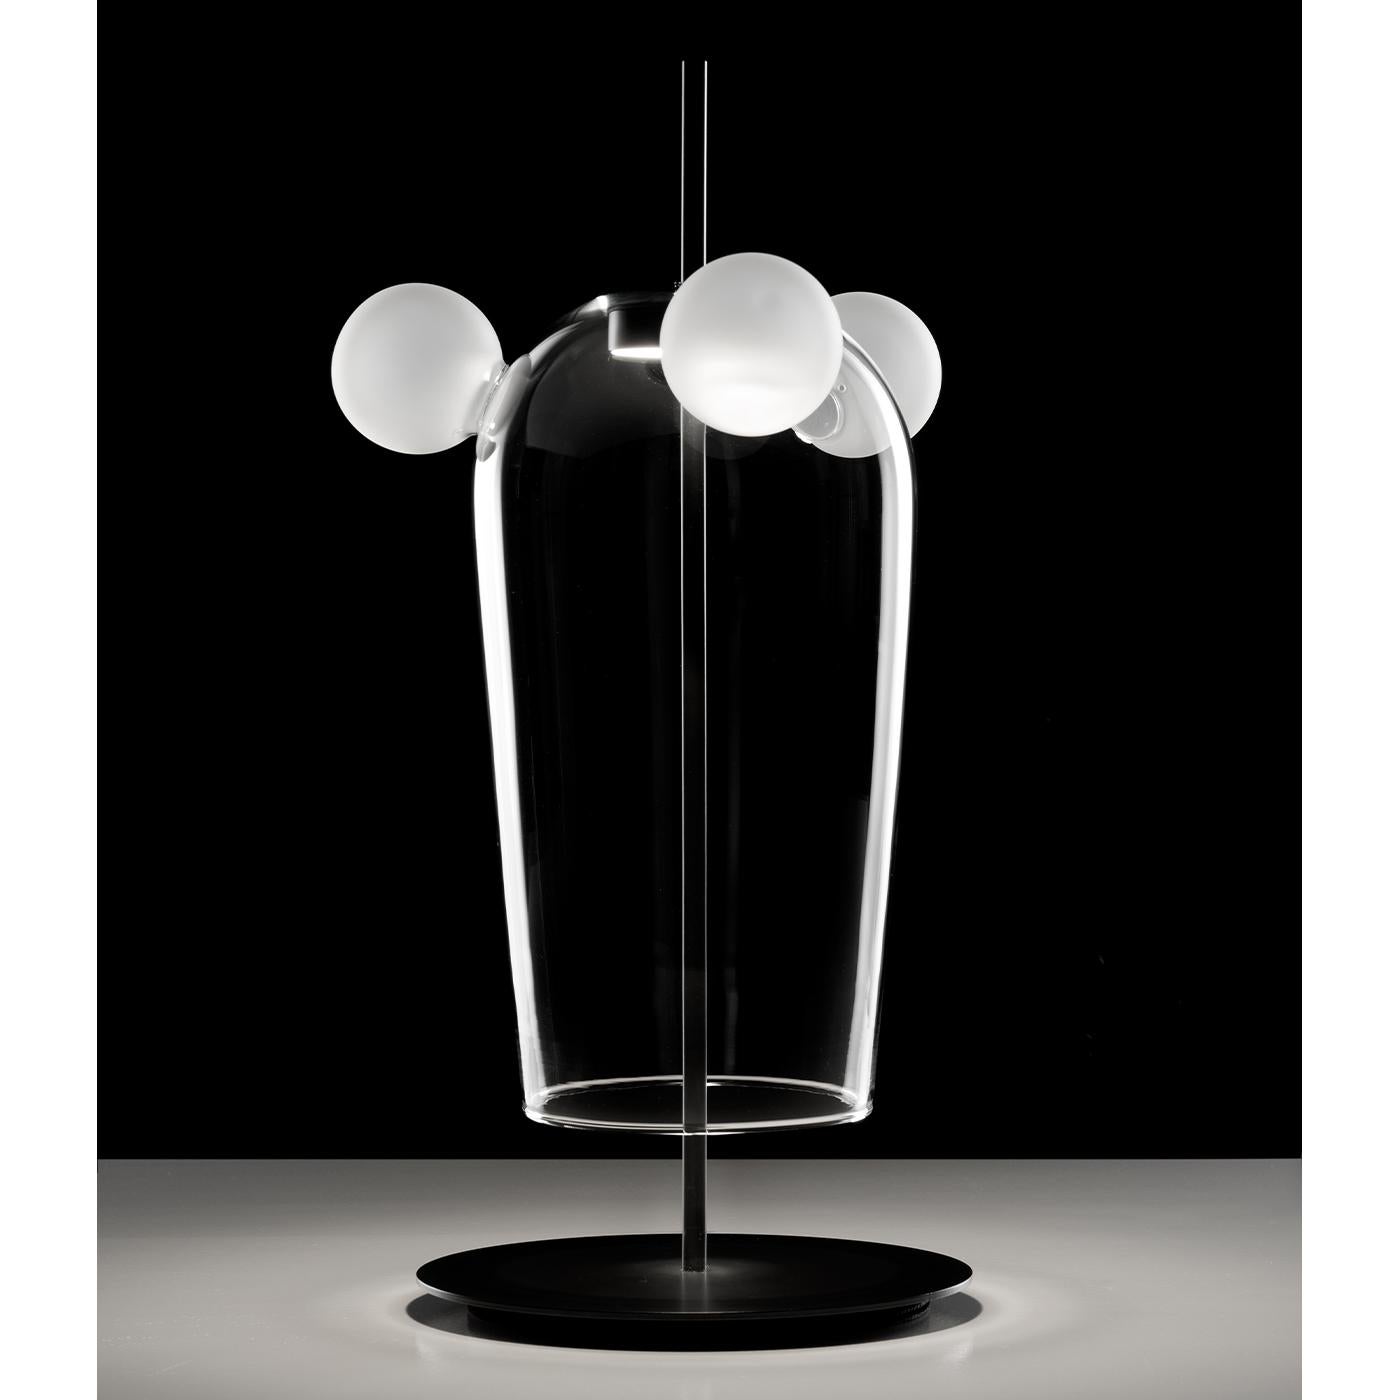 Its bell-shaped clear blown glass with three frosted spheres is a tribute to Bartolomeo Colleoni, an historical 